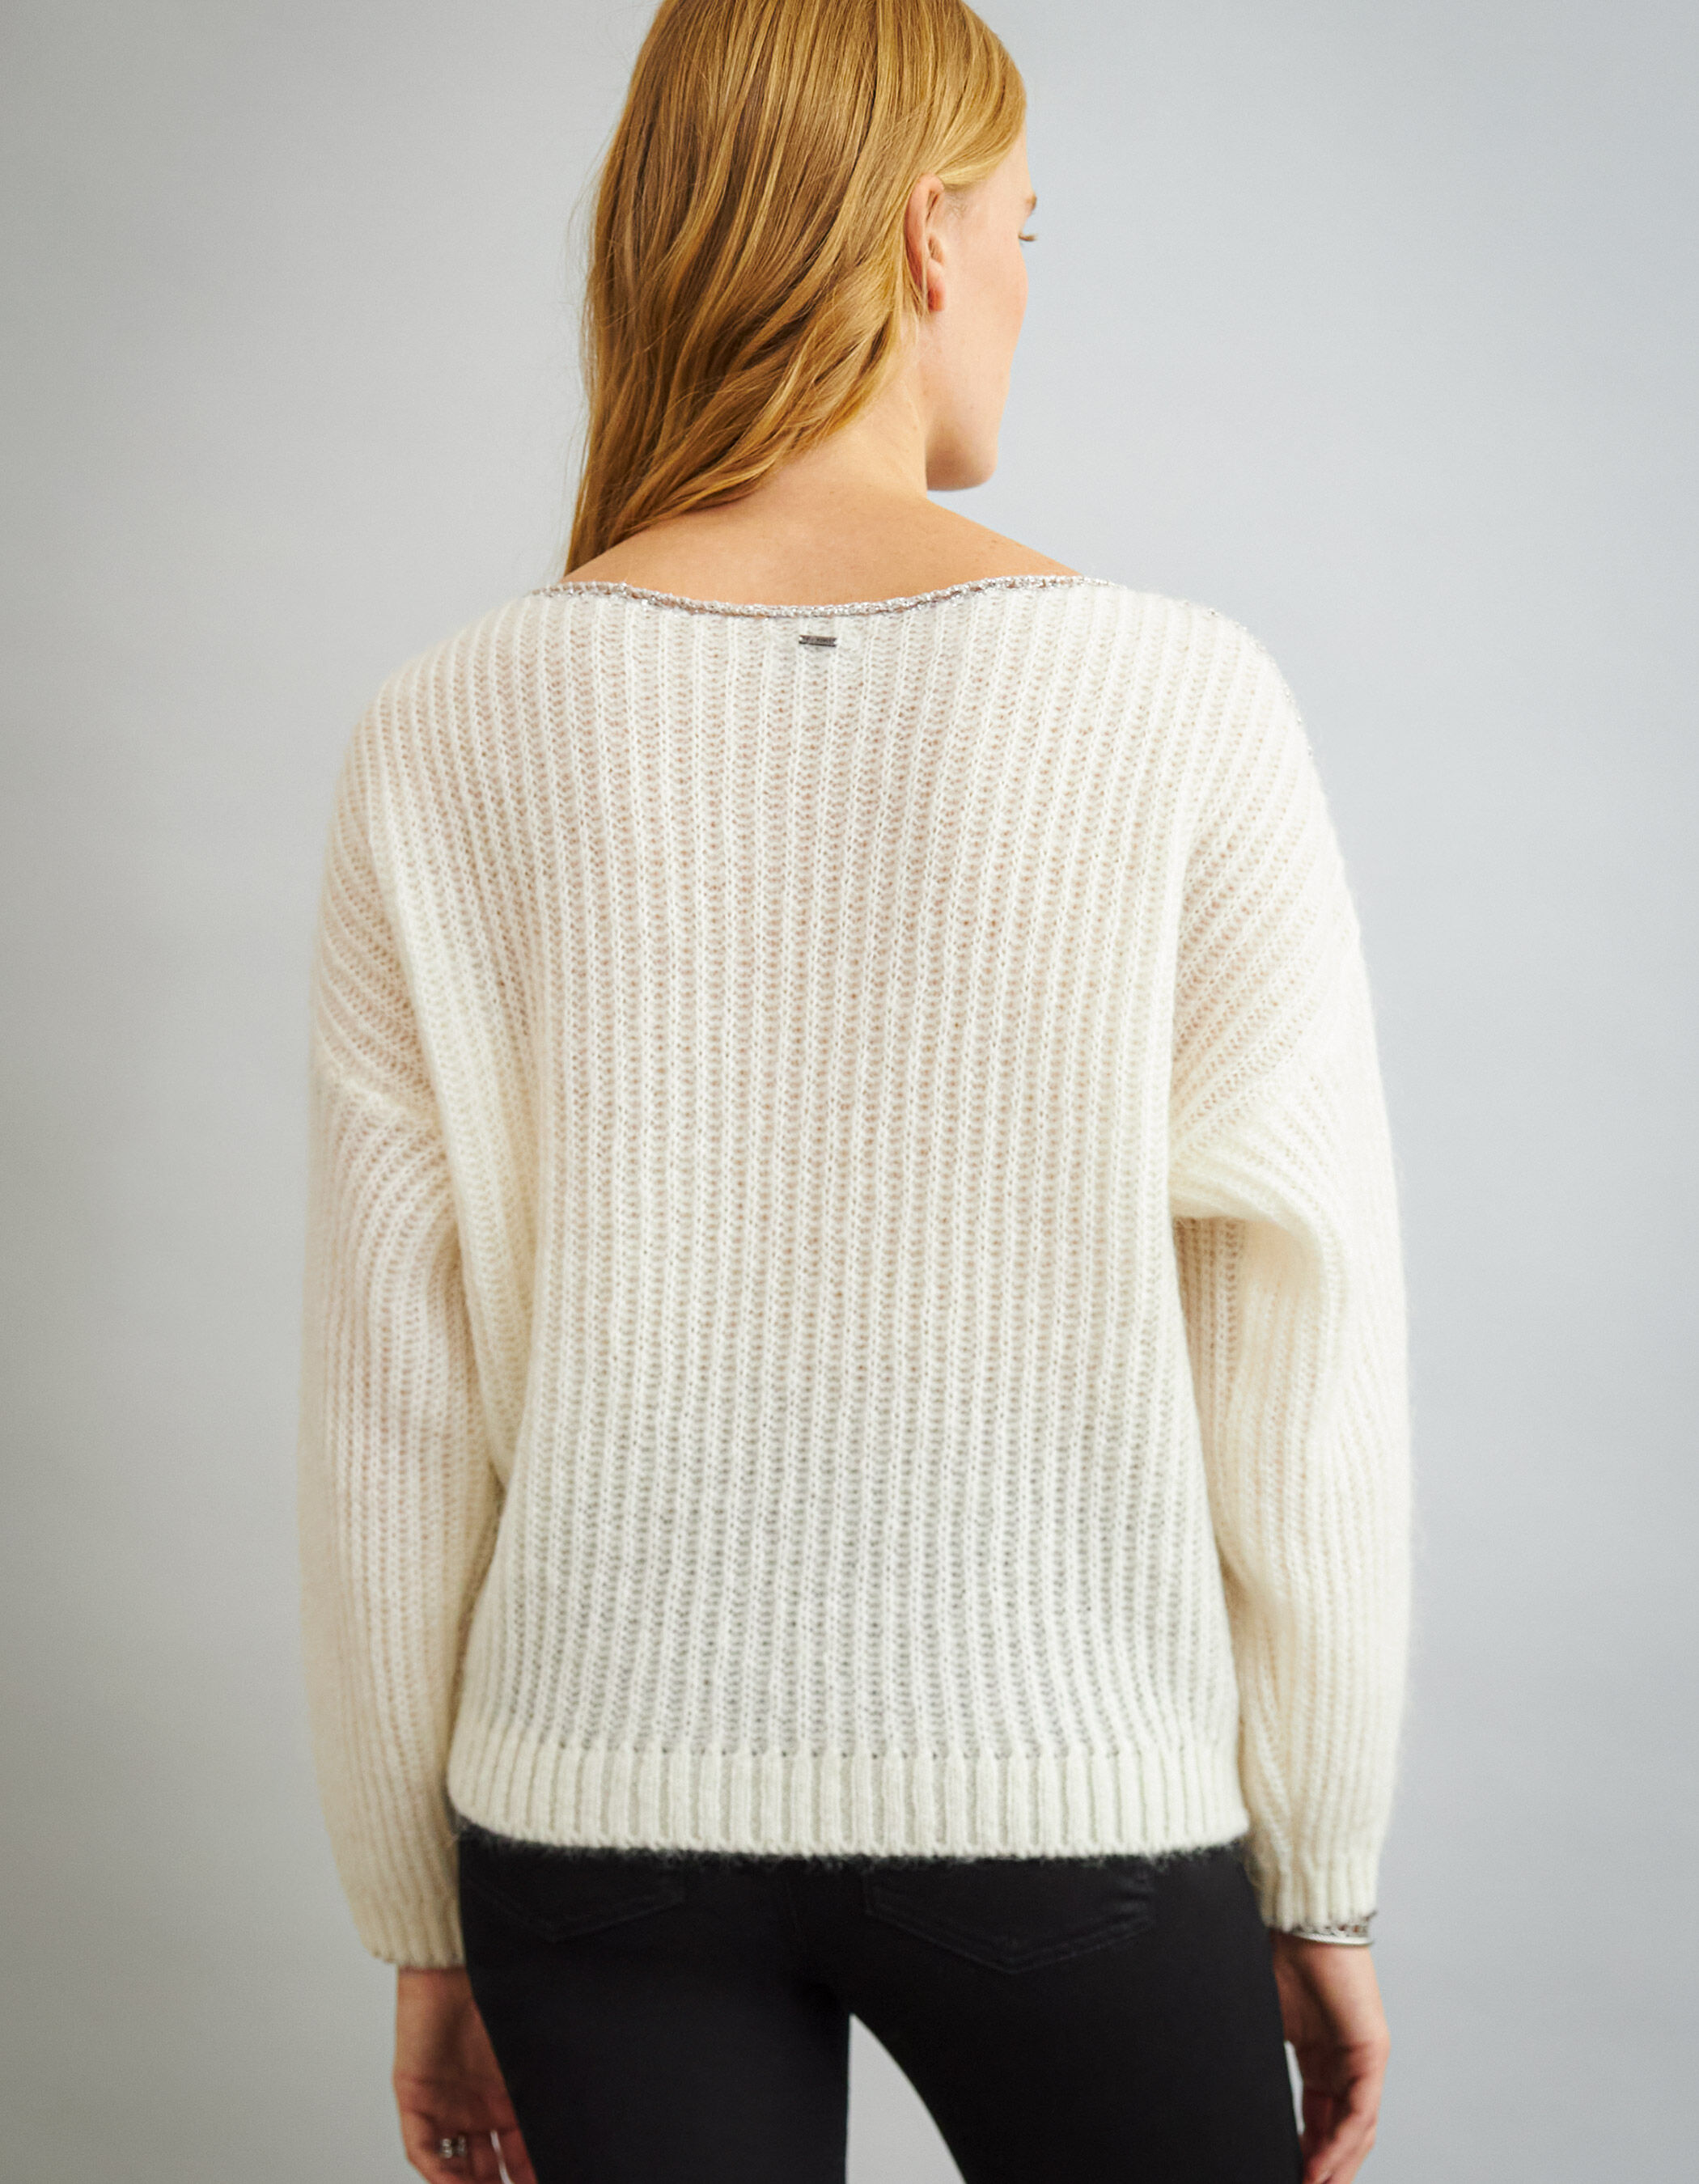 Women's ecru chunky knit sweater with mohair